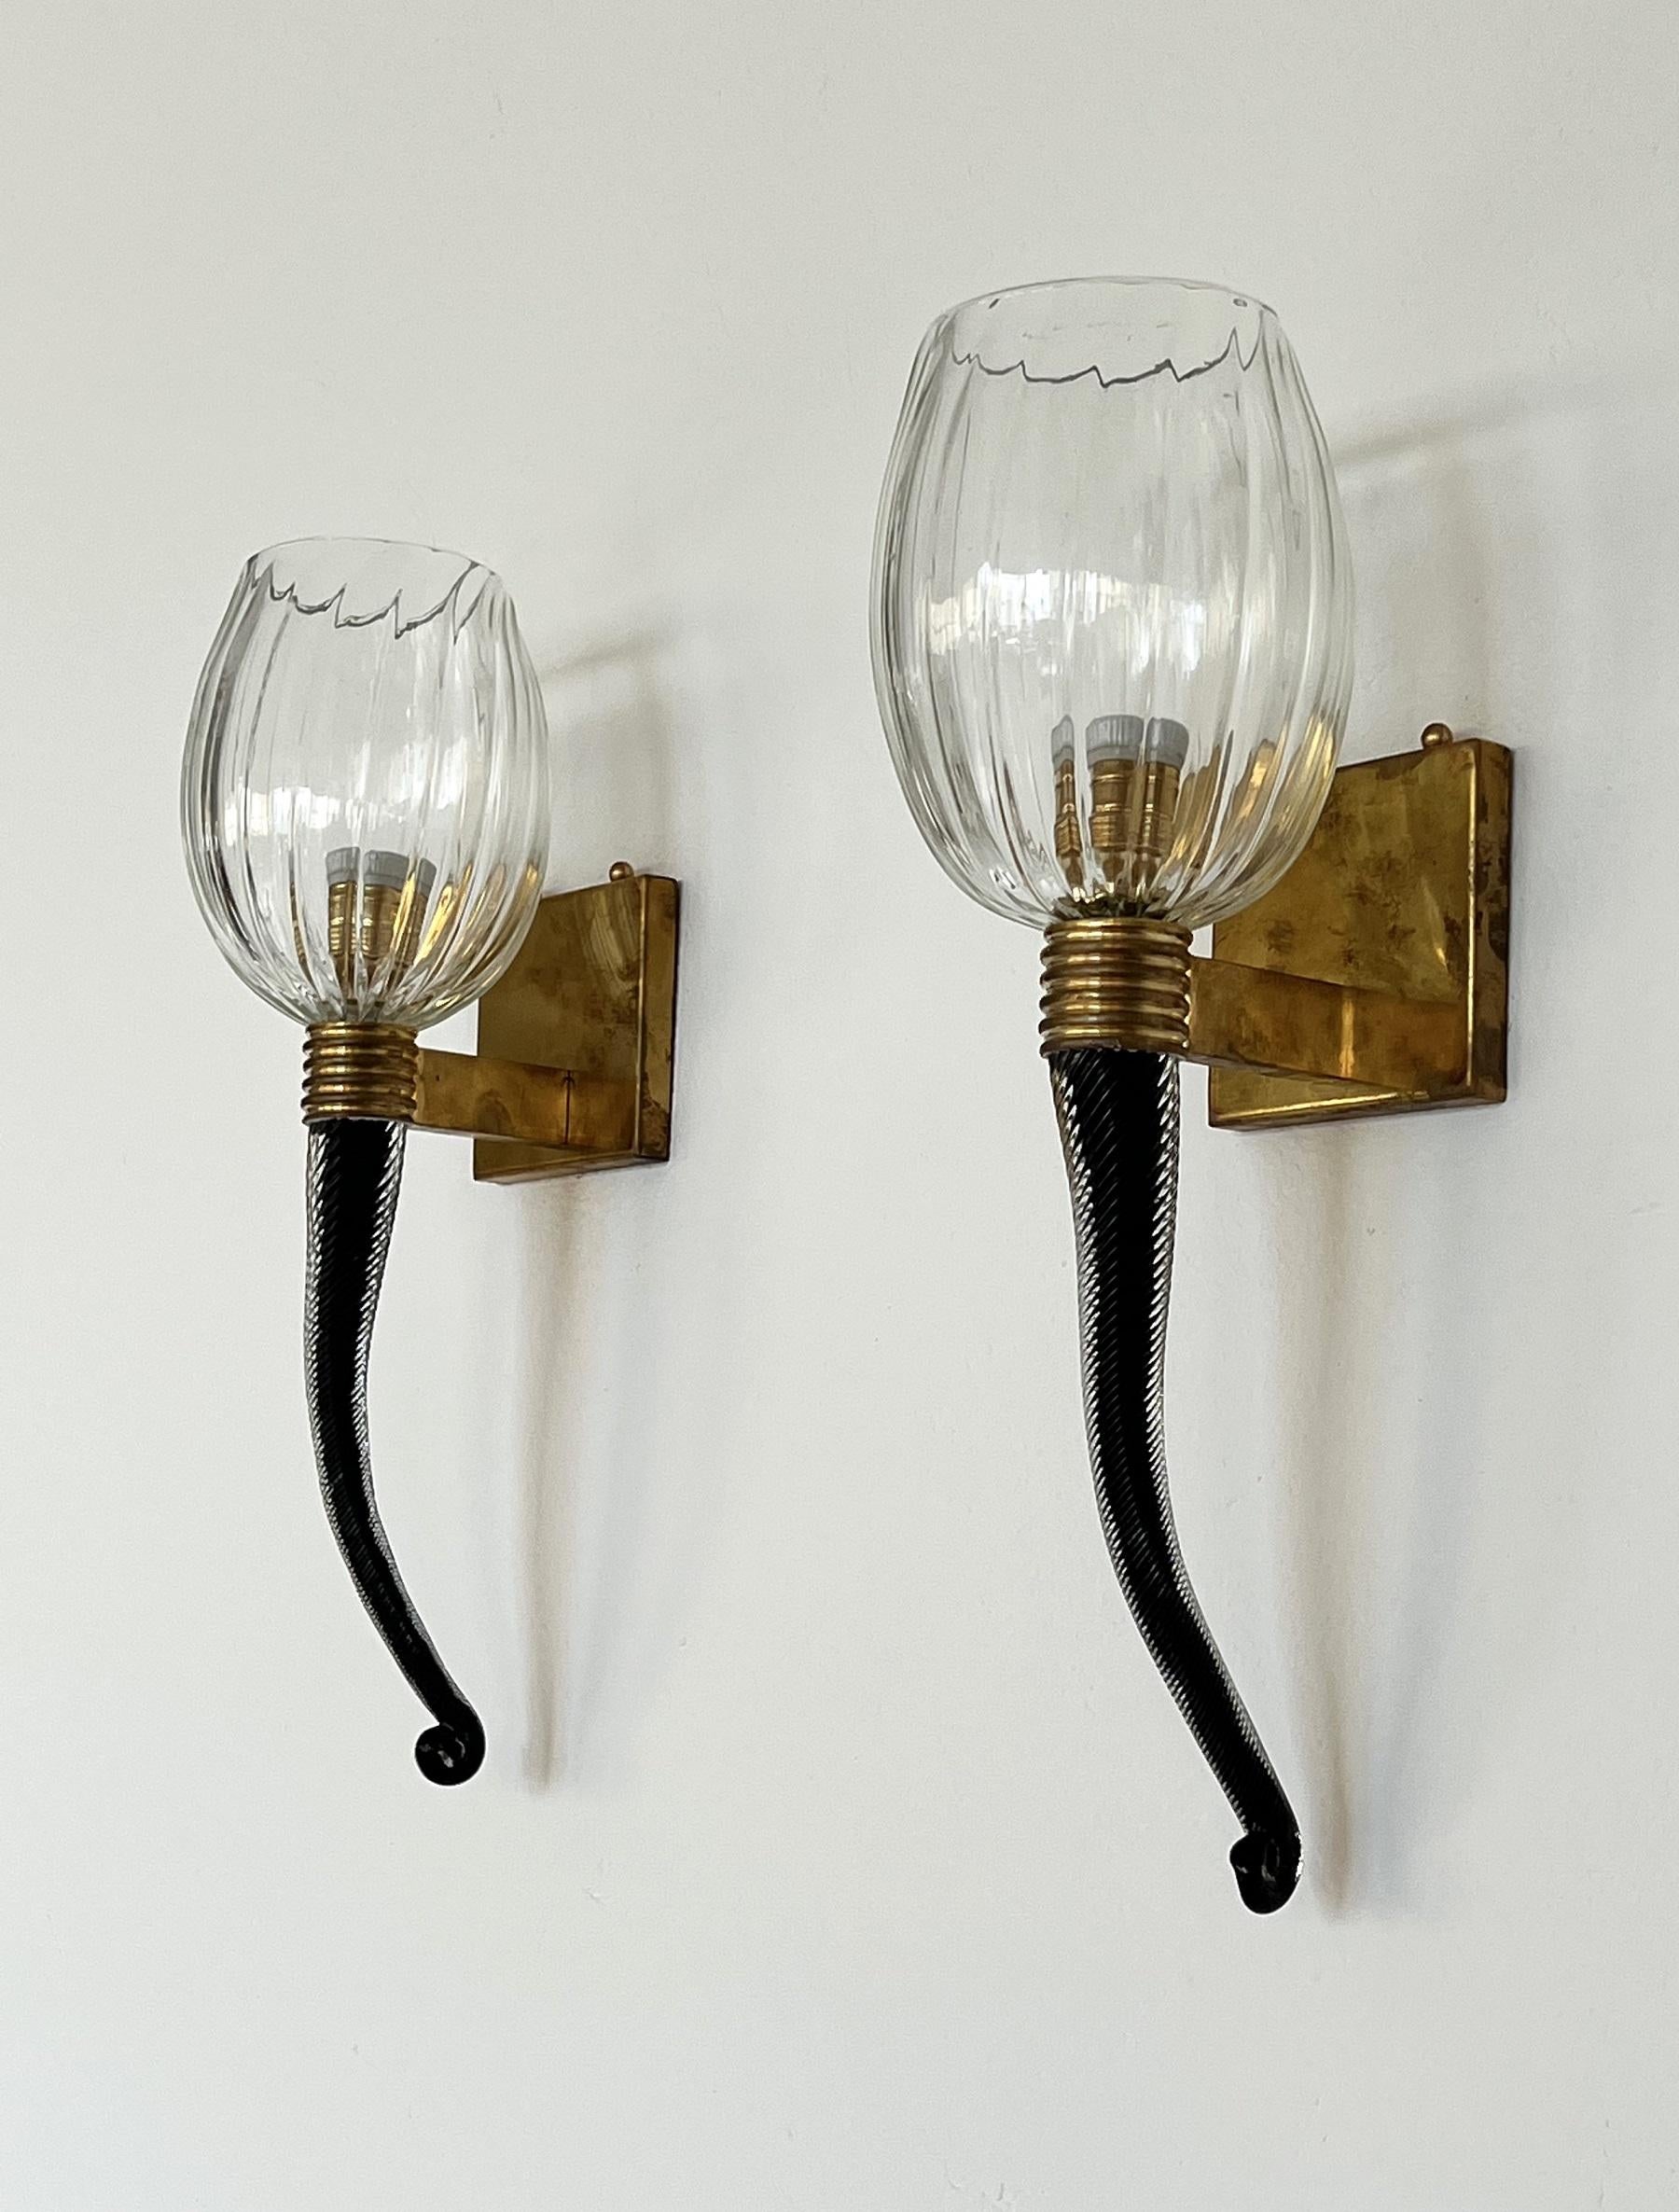 Hand-Crafted Italian Large Murano Glass Wall Lights or Sconces in Barovier Toso Style, 1990s